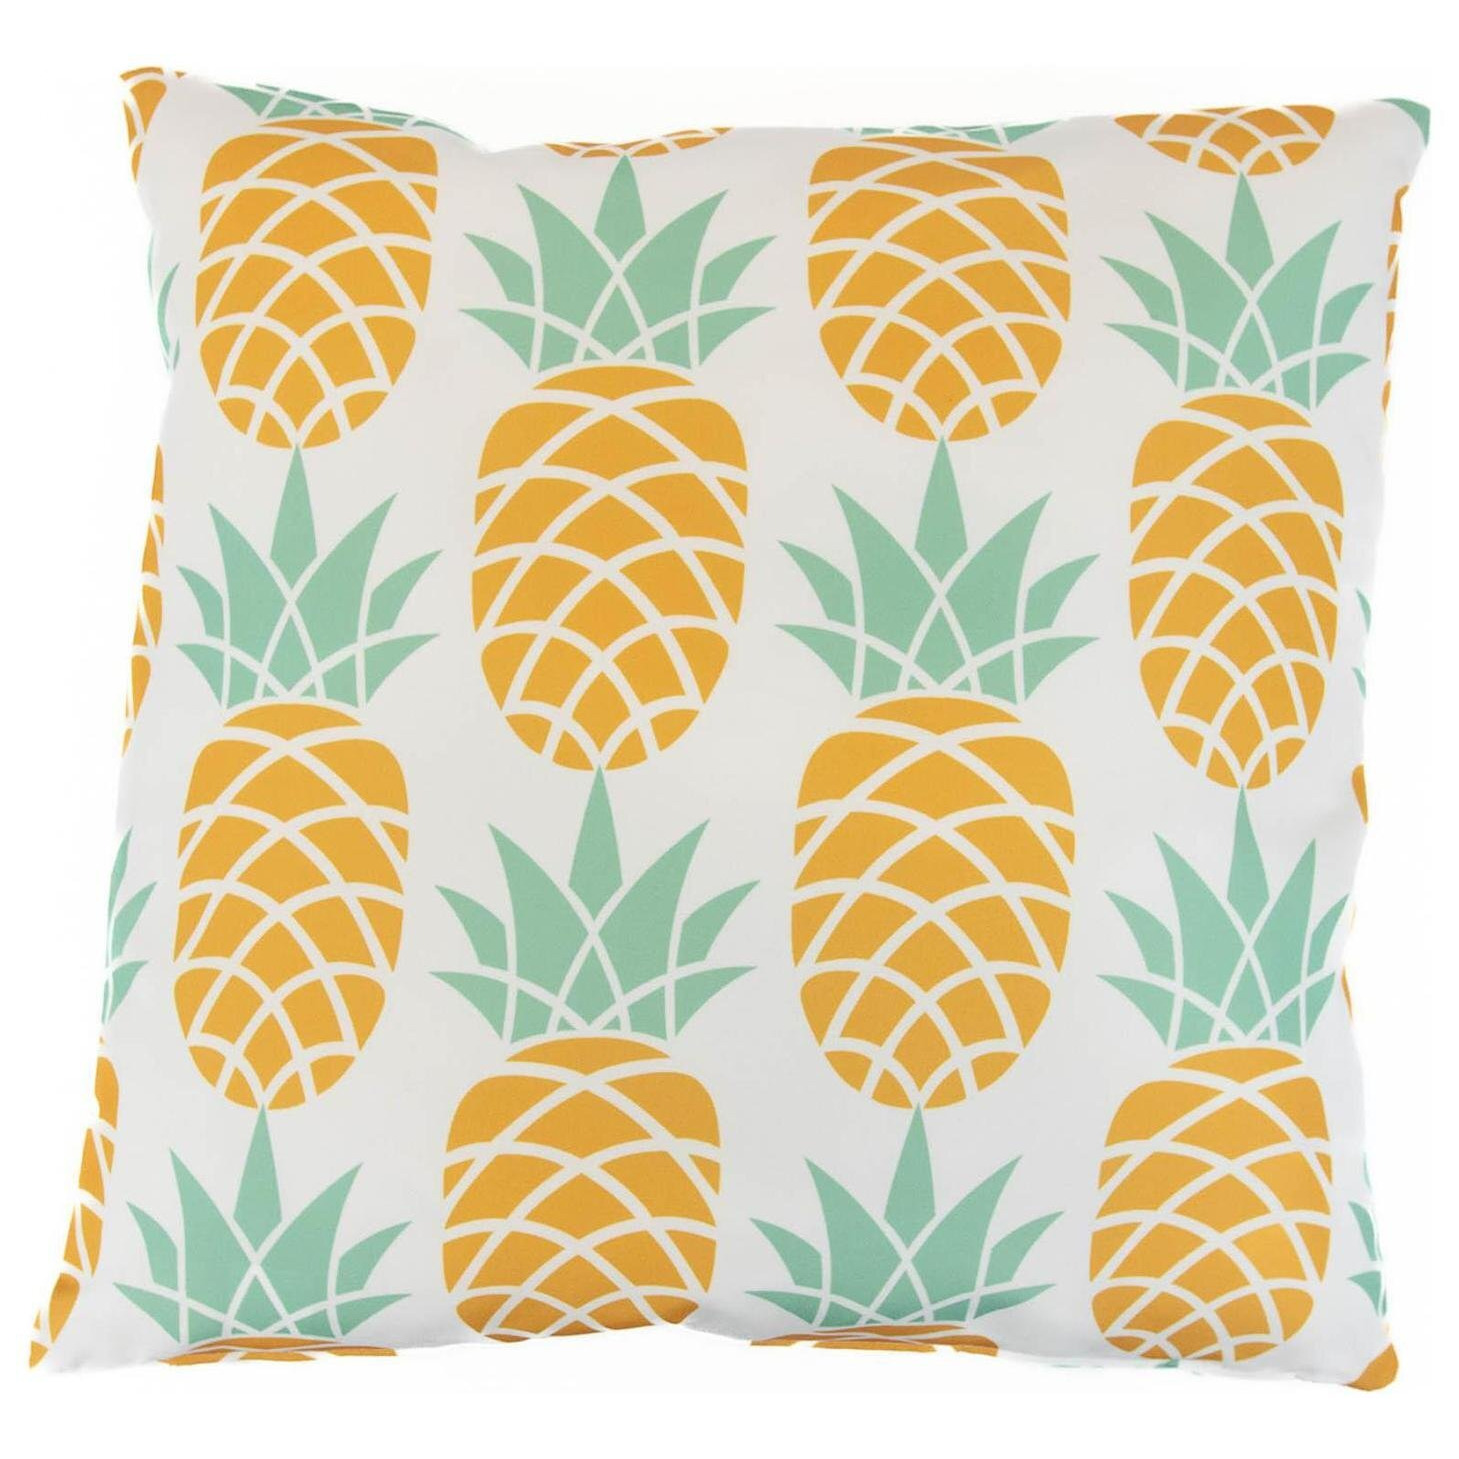 Streetwize Pineapple Printed Outdoor Cushion - Pack Of 4